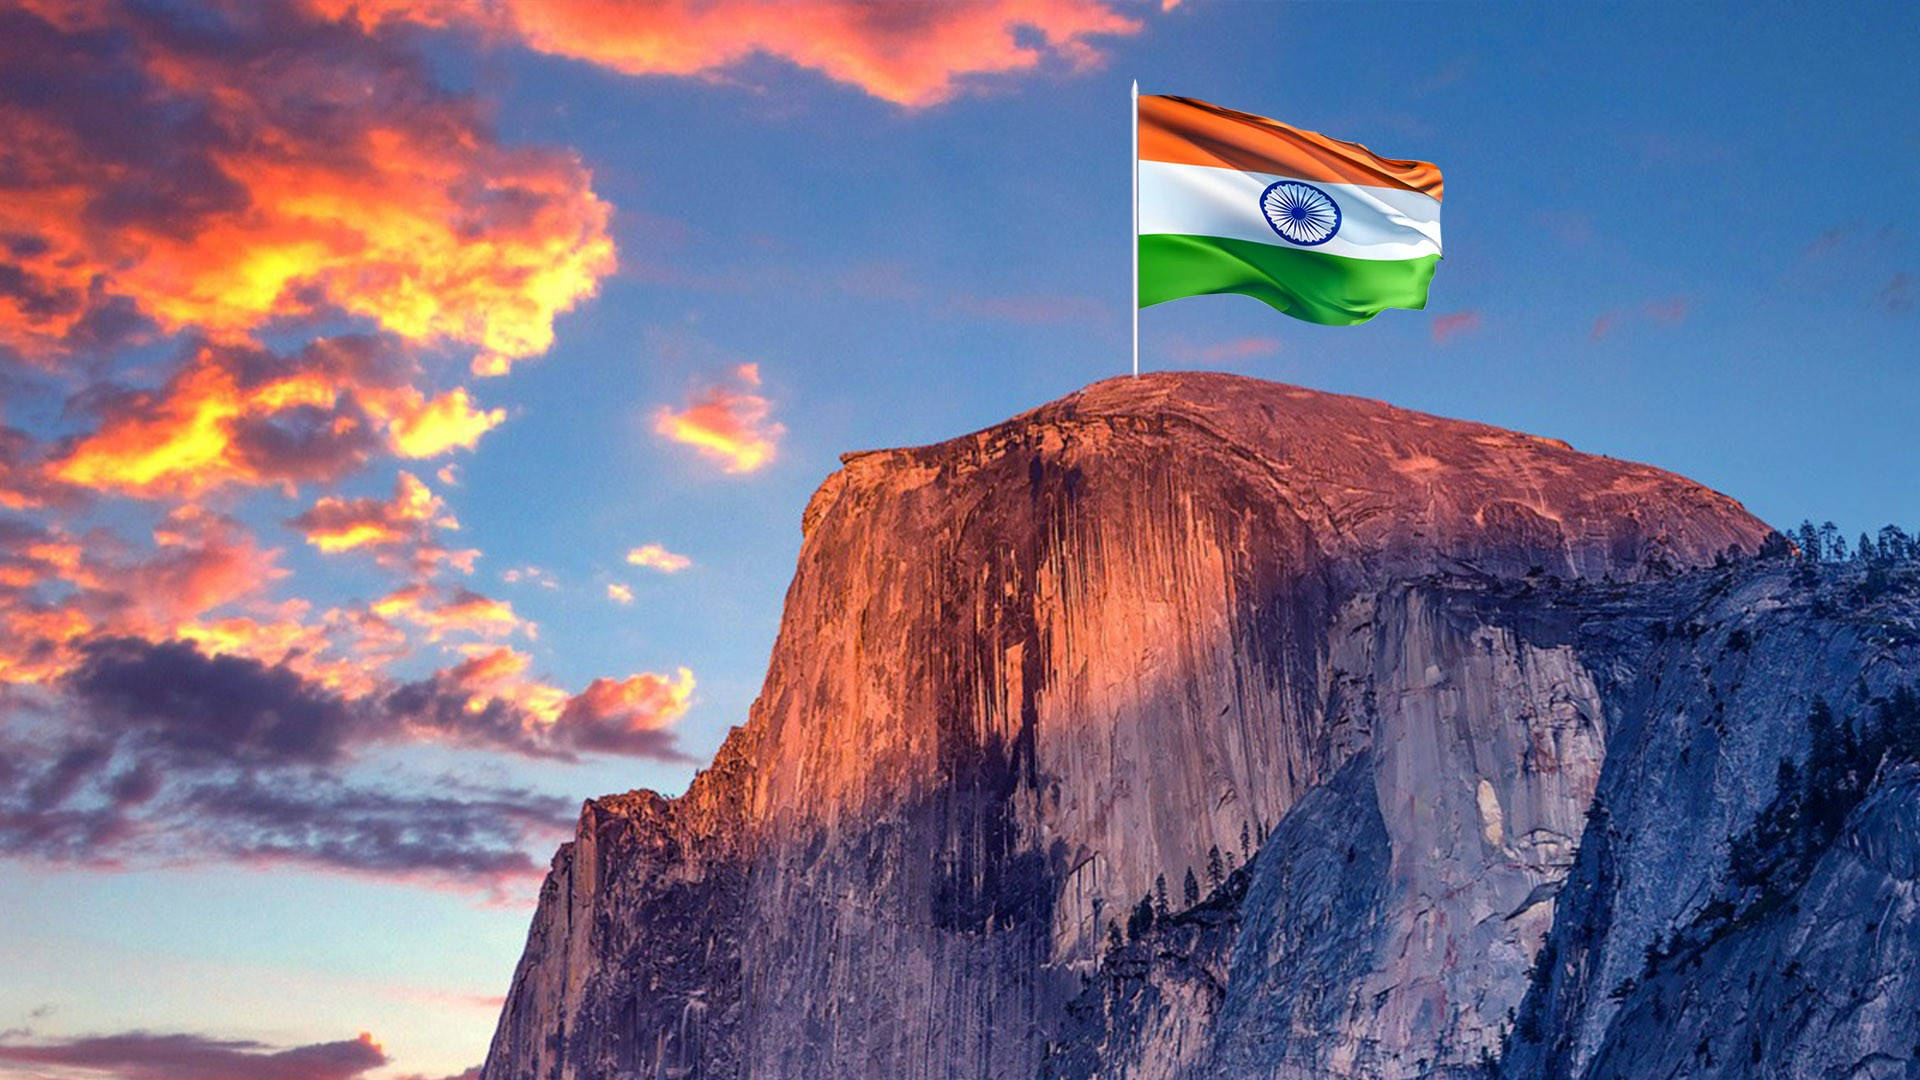 Mountain Top With Indian Flag